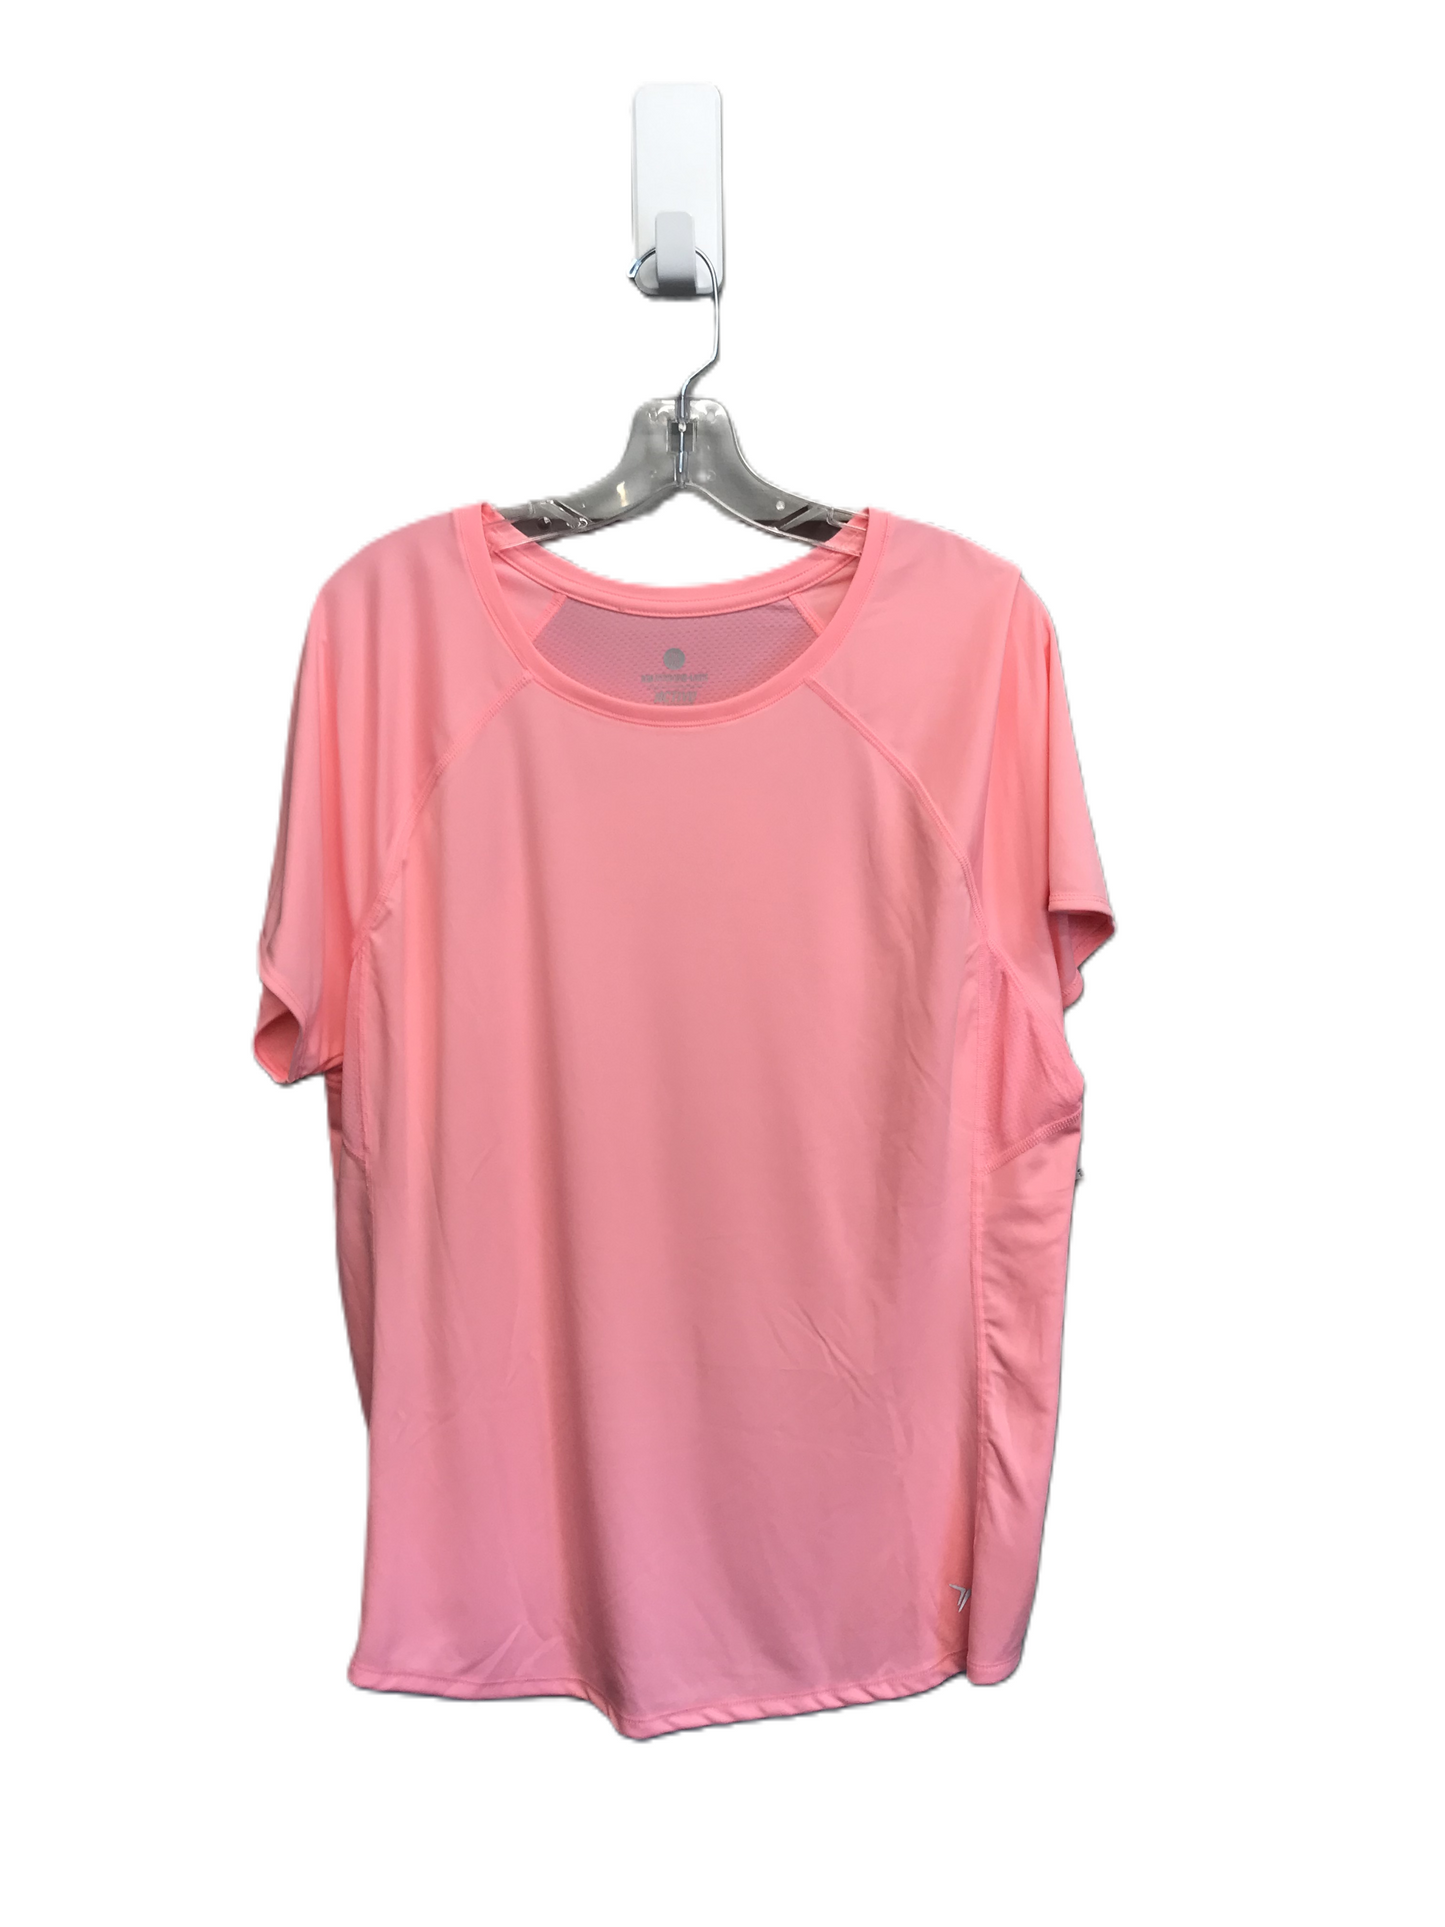 Pink Athletic Top Short Sleeve By Old Navy, Size: 1x